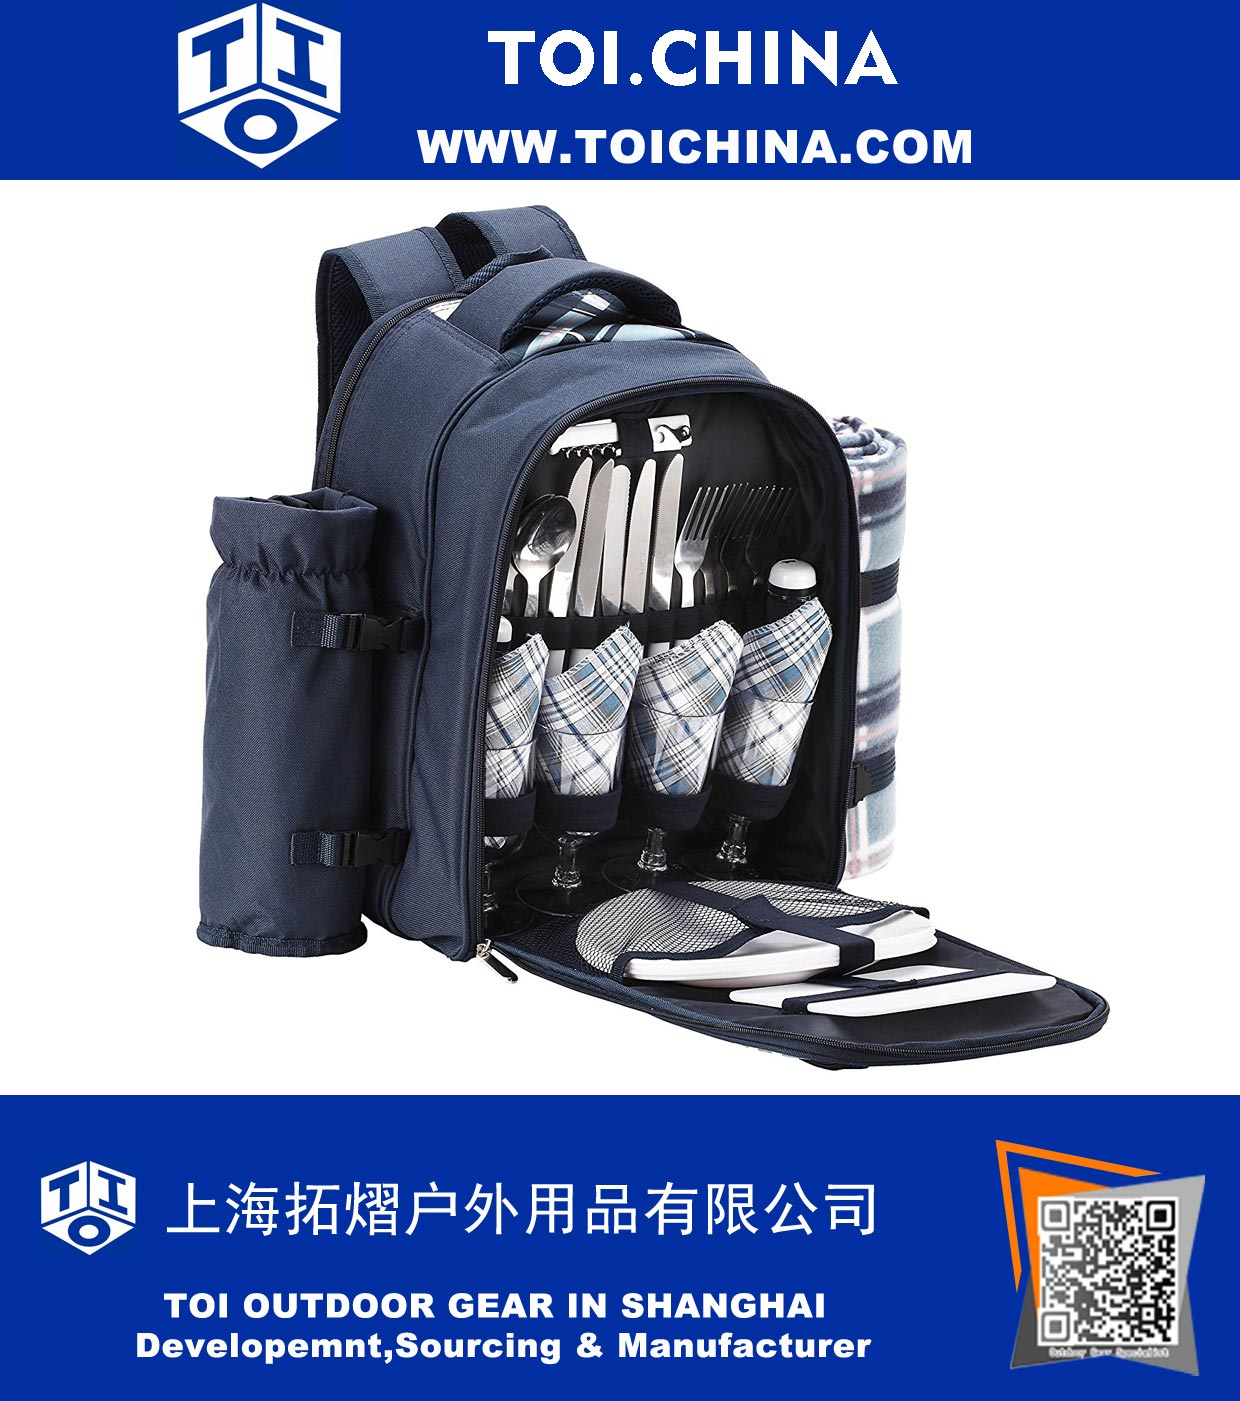 4 Person Blue Tartan Picnic Backpack With Cooler Compartment, Detachable Bottle/Wine Holder, Fleece Blanket, Flatware and Plates